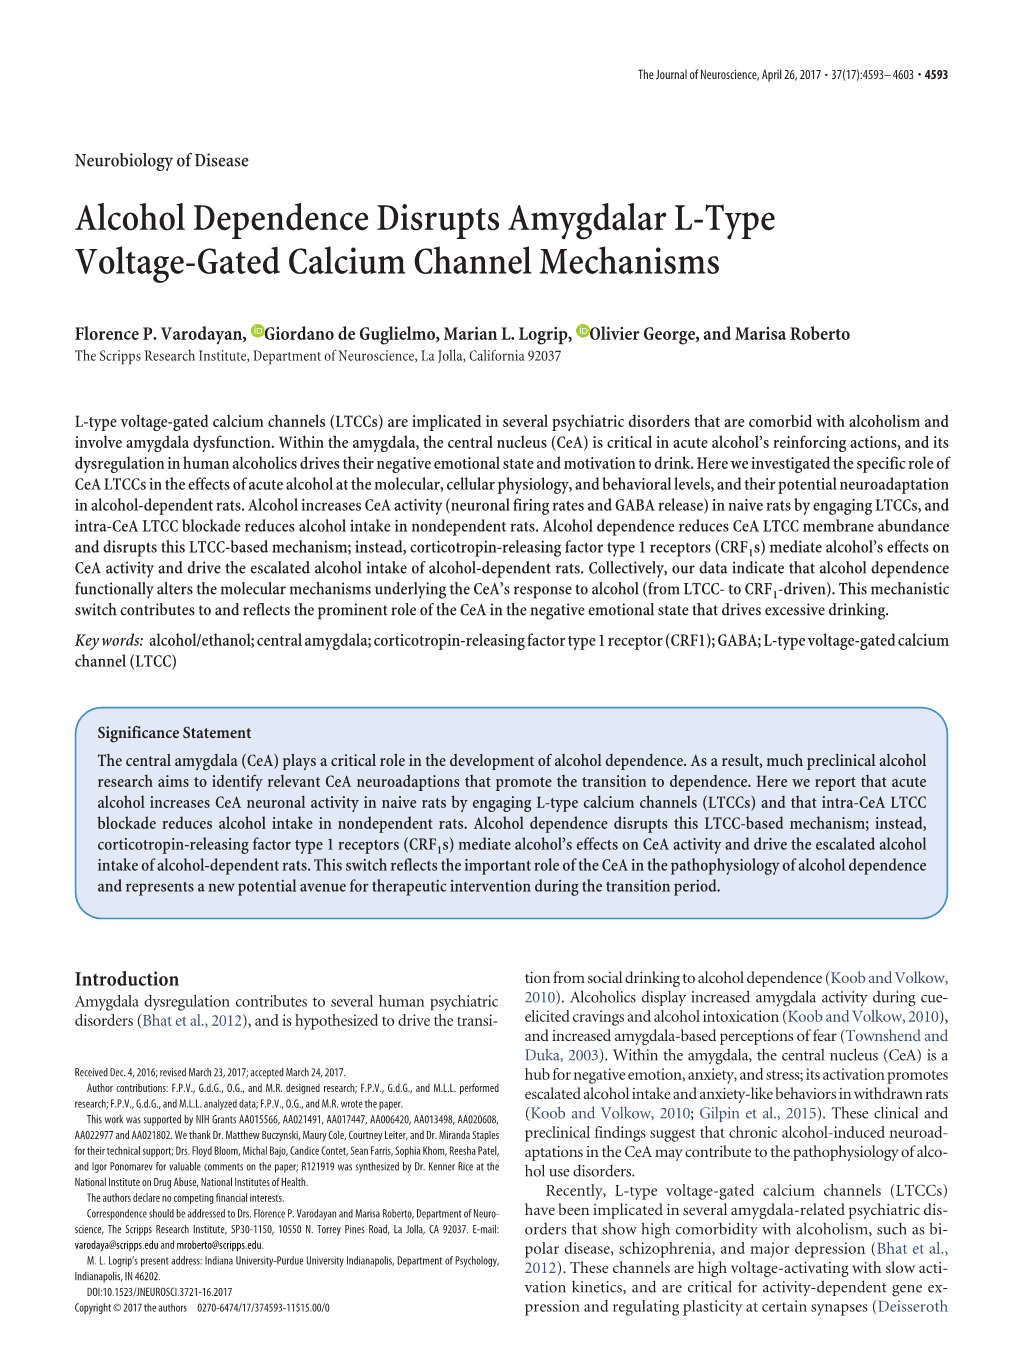 Alcohol Dependence Disrupts Amygdalar L-Type Voltage-Gated Calcium Channel Mechanisms